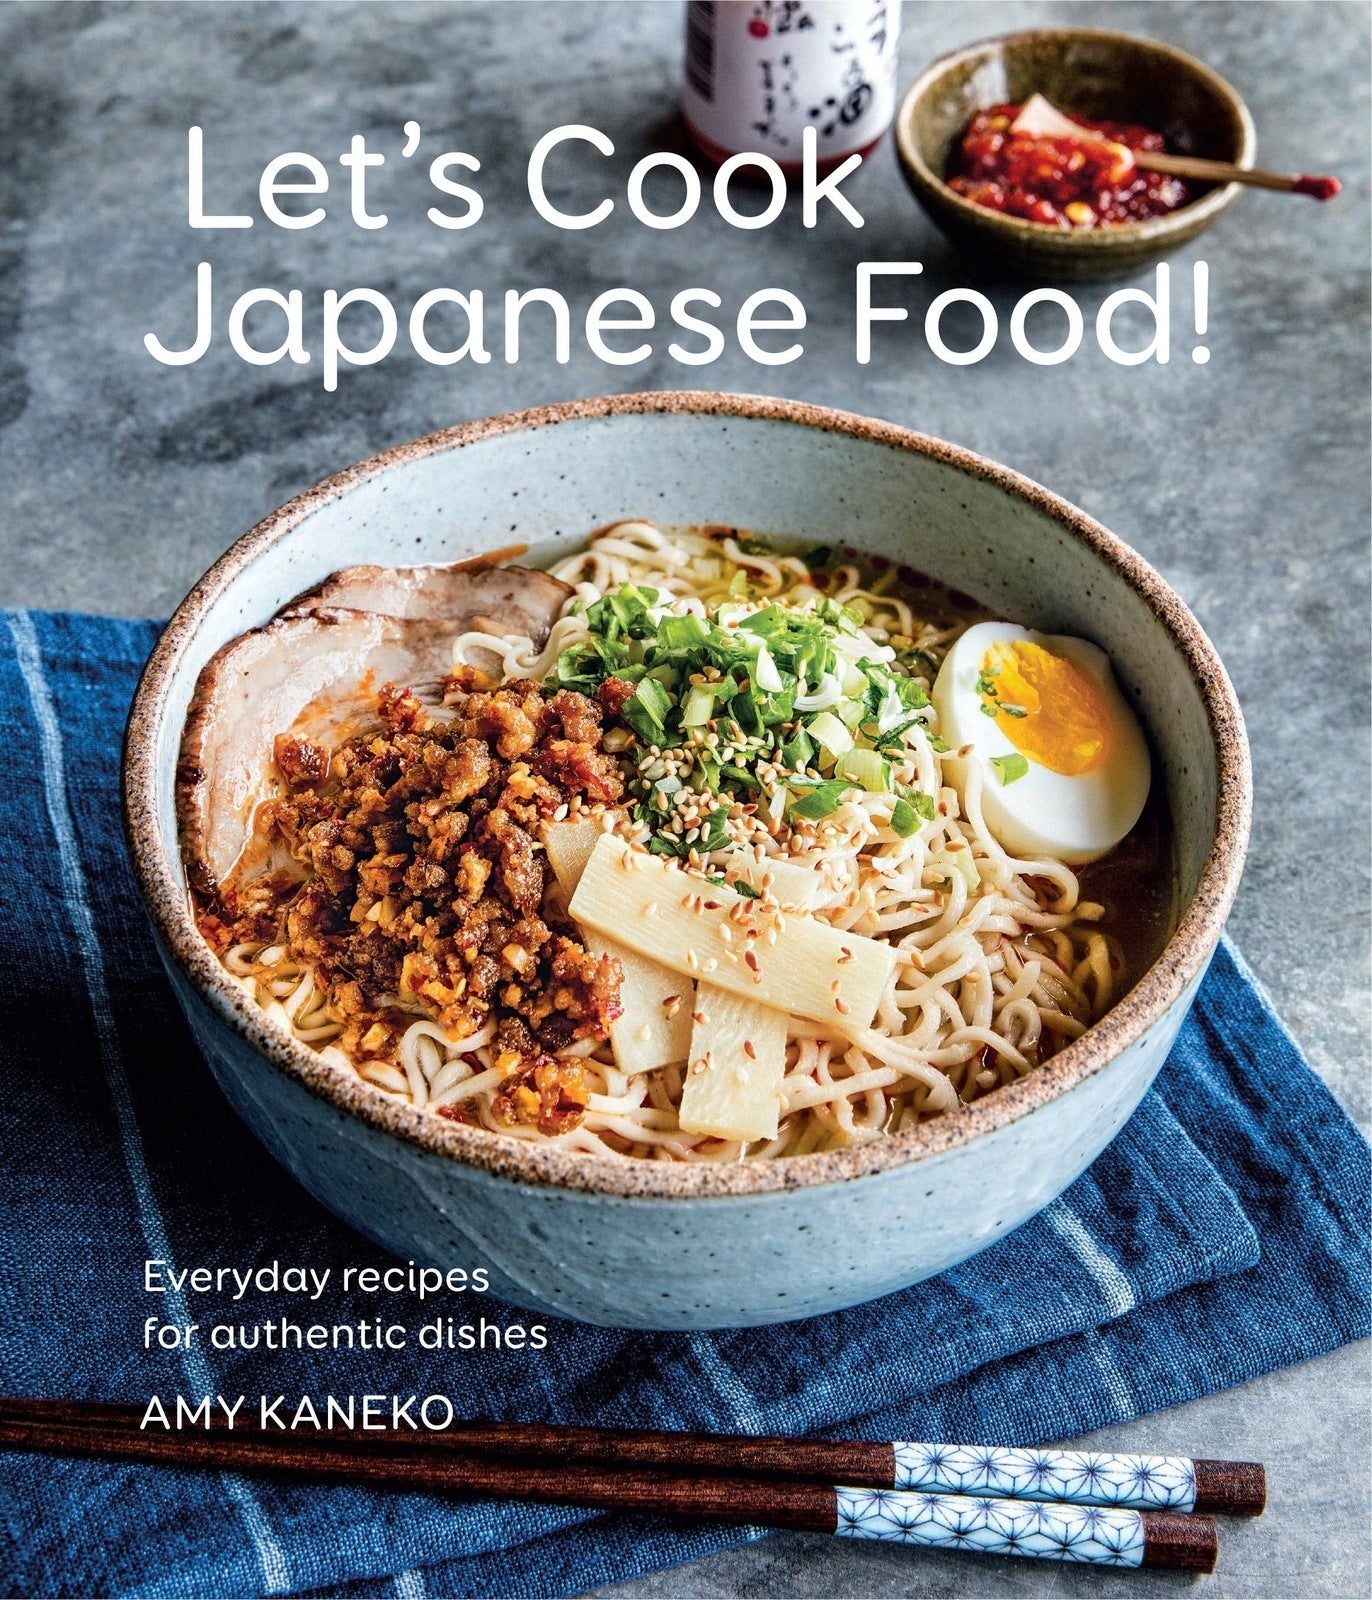 Let's Cook Japanese Food! Books